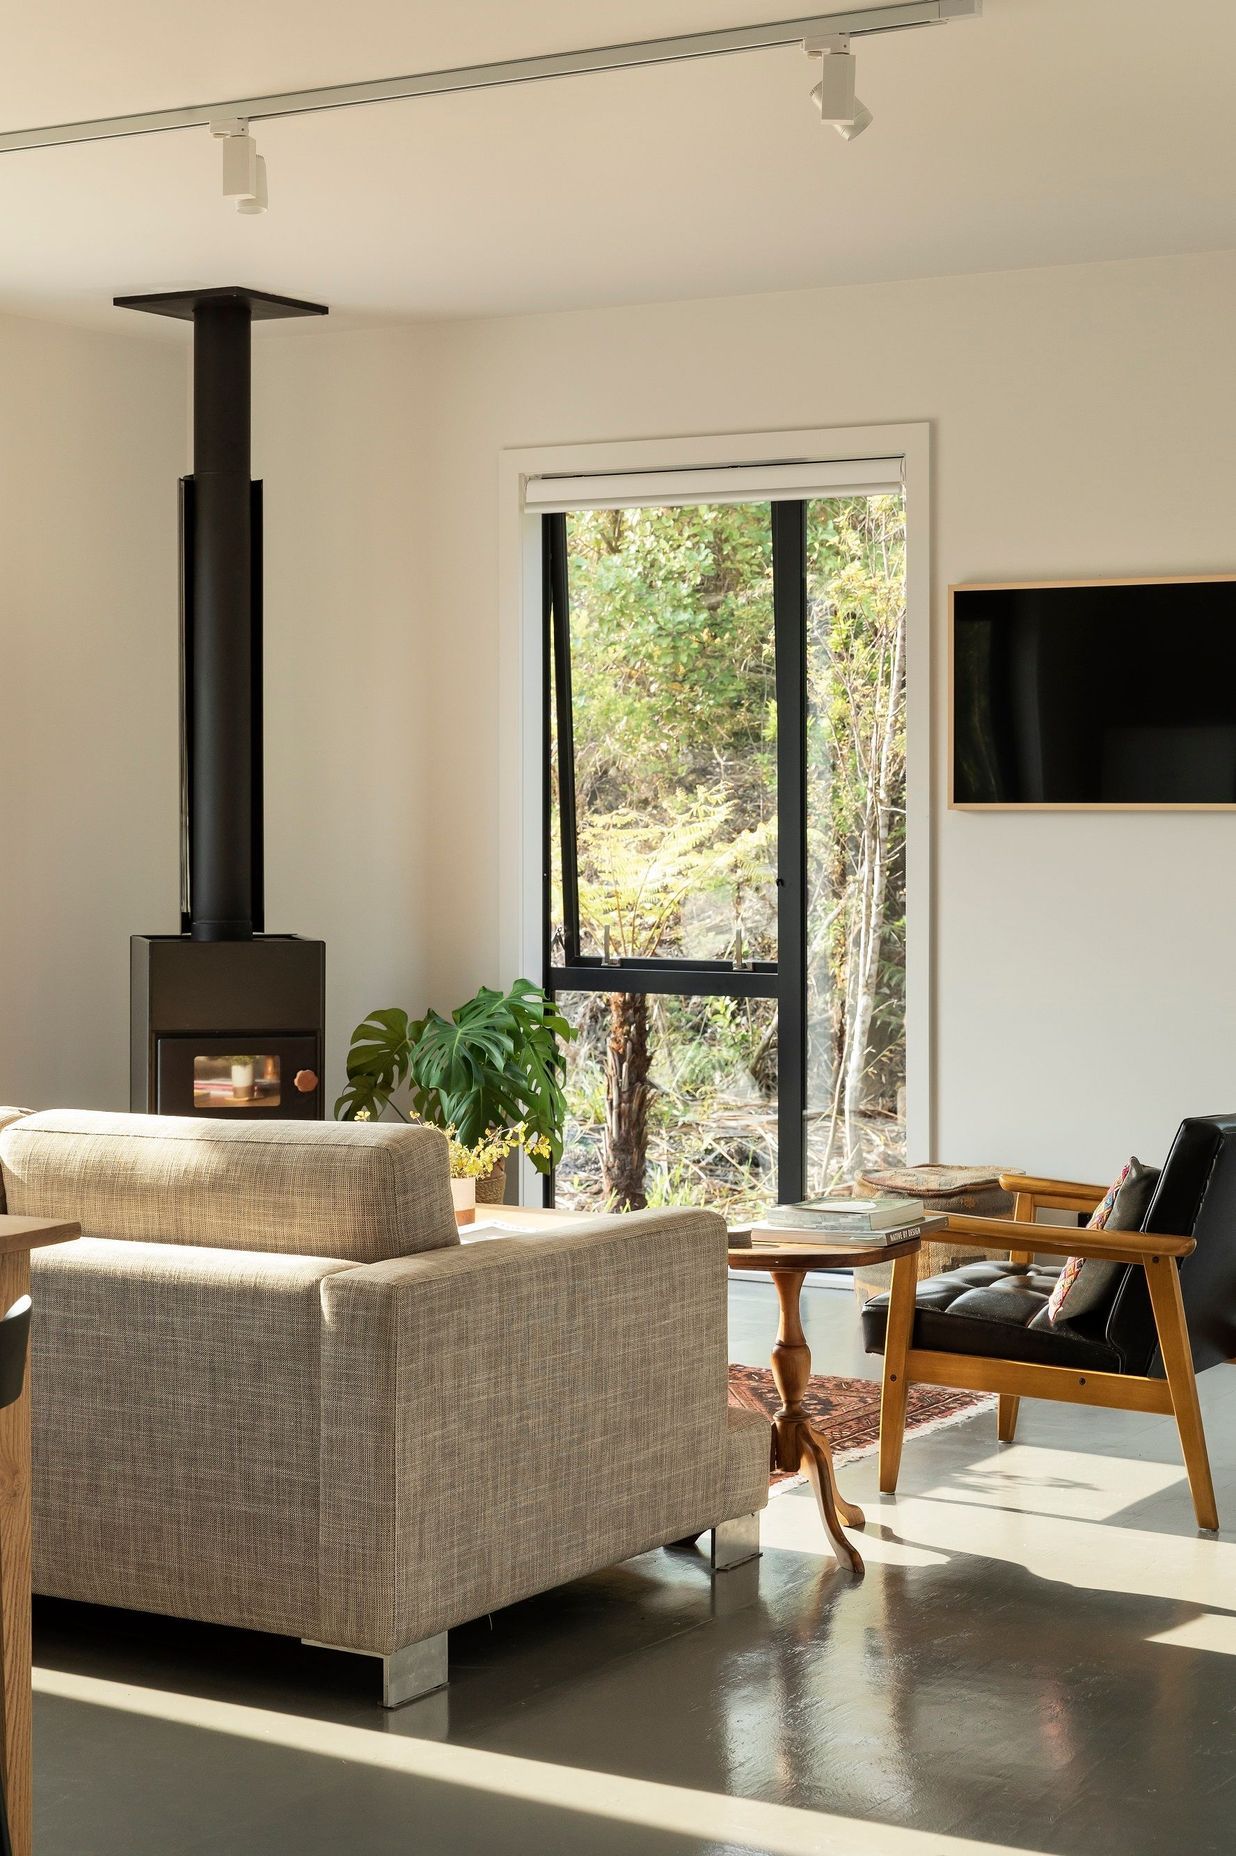 In winter, the woodburner becomes the focal point of the home. 